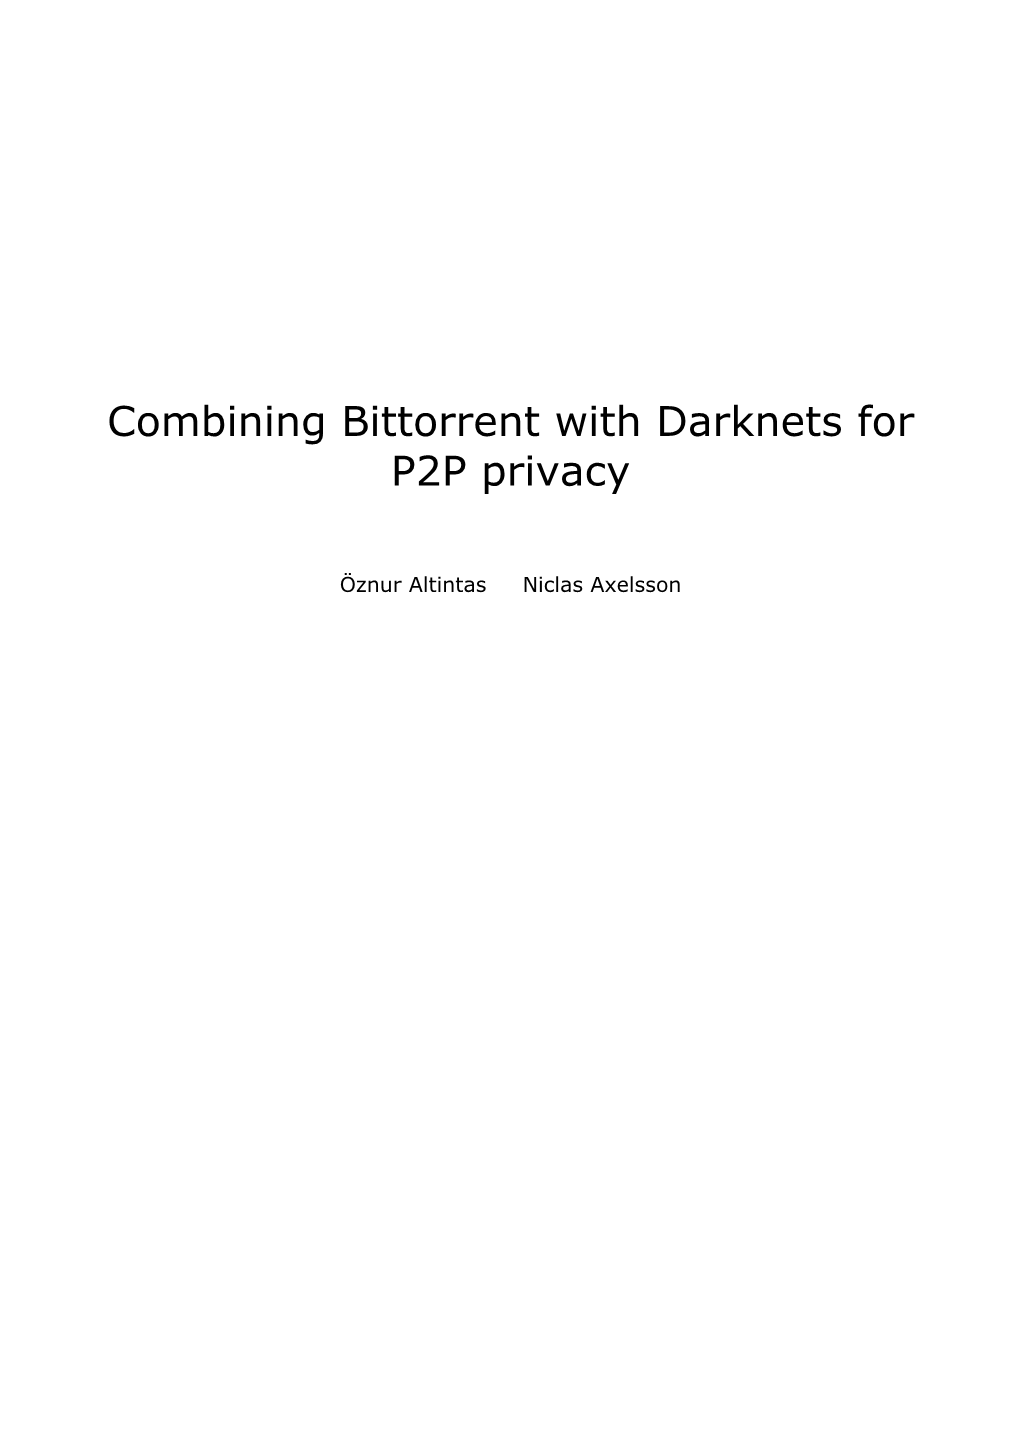 Combining Bittorrent with Darknets for P2P Privacy